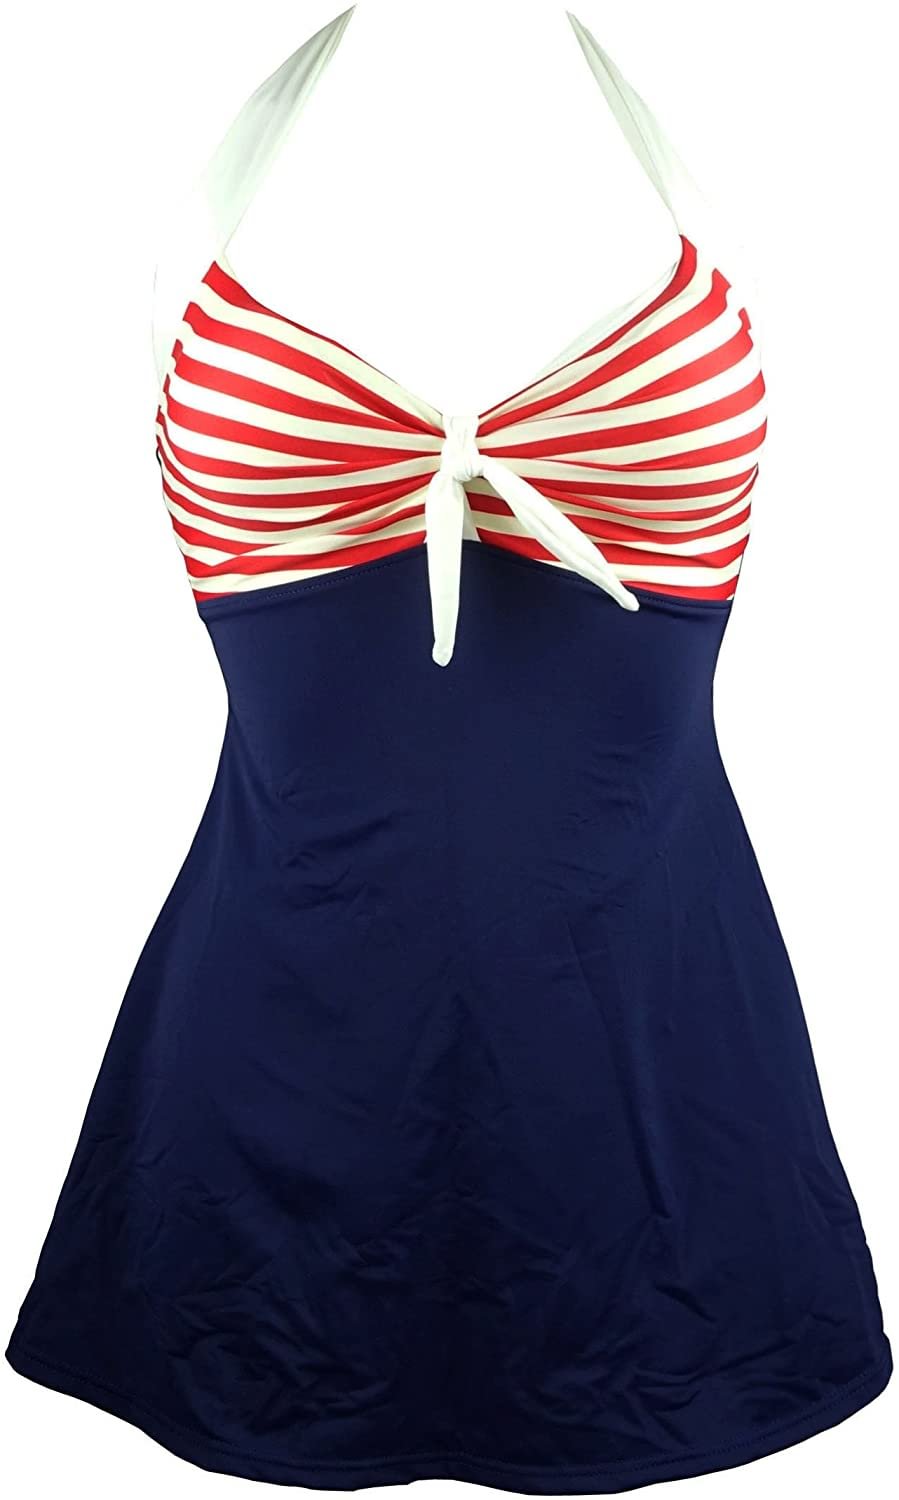 Vintage Sailor Pin Up Swimsuit Retro One Piece Skirtini Cover Up Swimdress